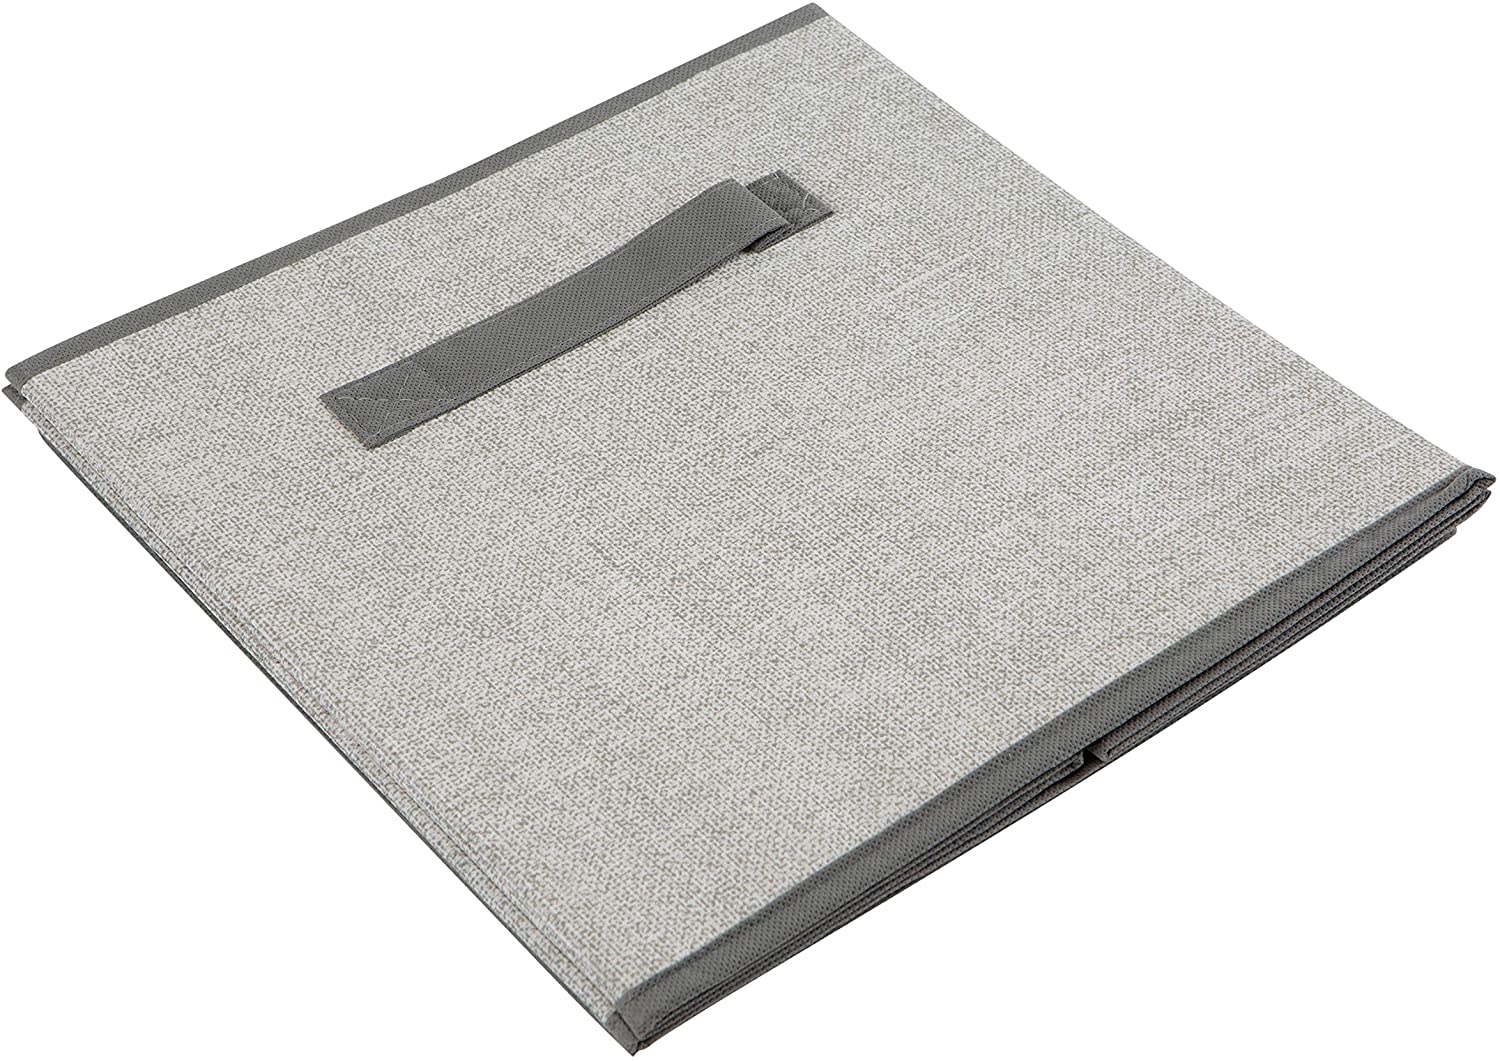 Unknown1 Collapsible Storage Cube Grey 12